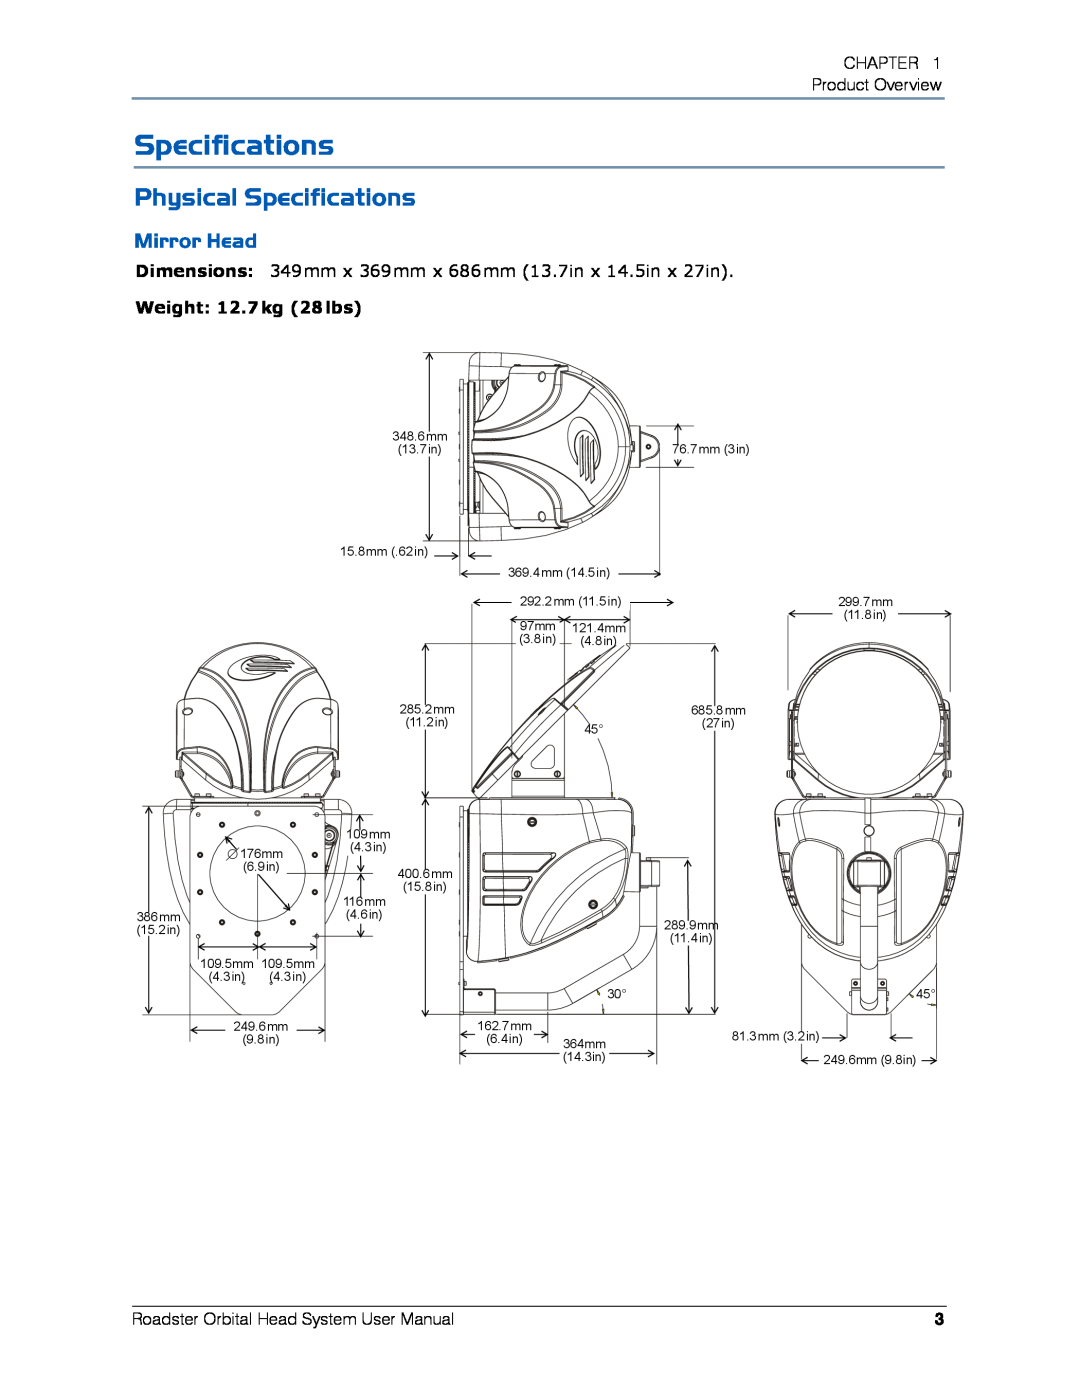 High End Systems Roadster Orbital Head System user manual Physical Specifications, Mirror Head 